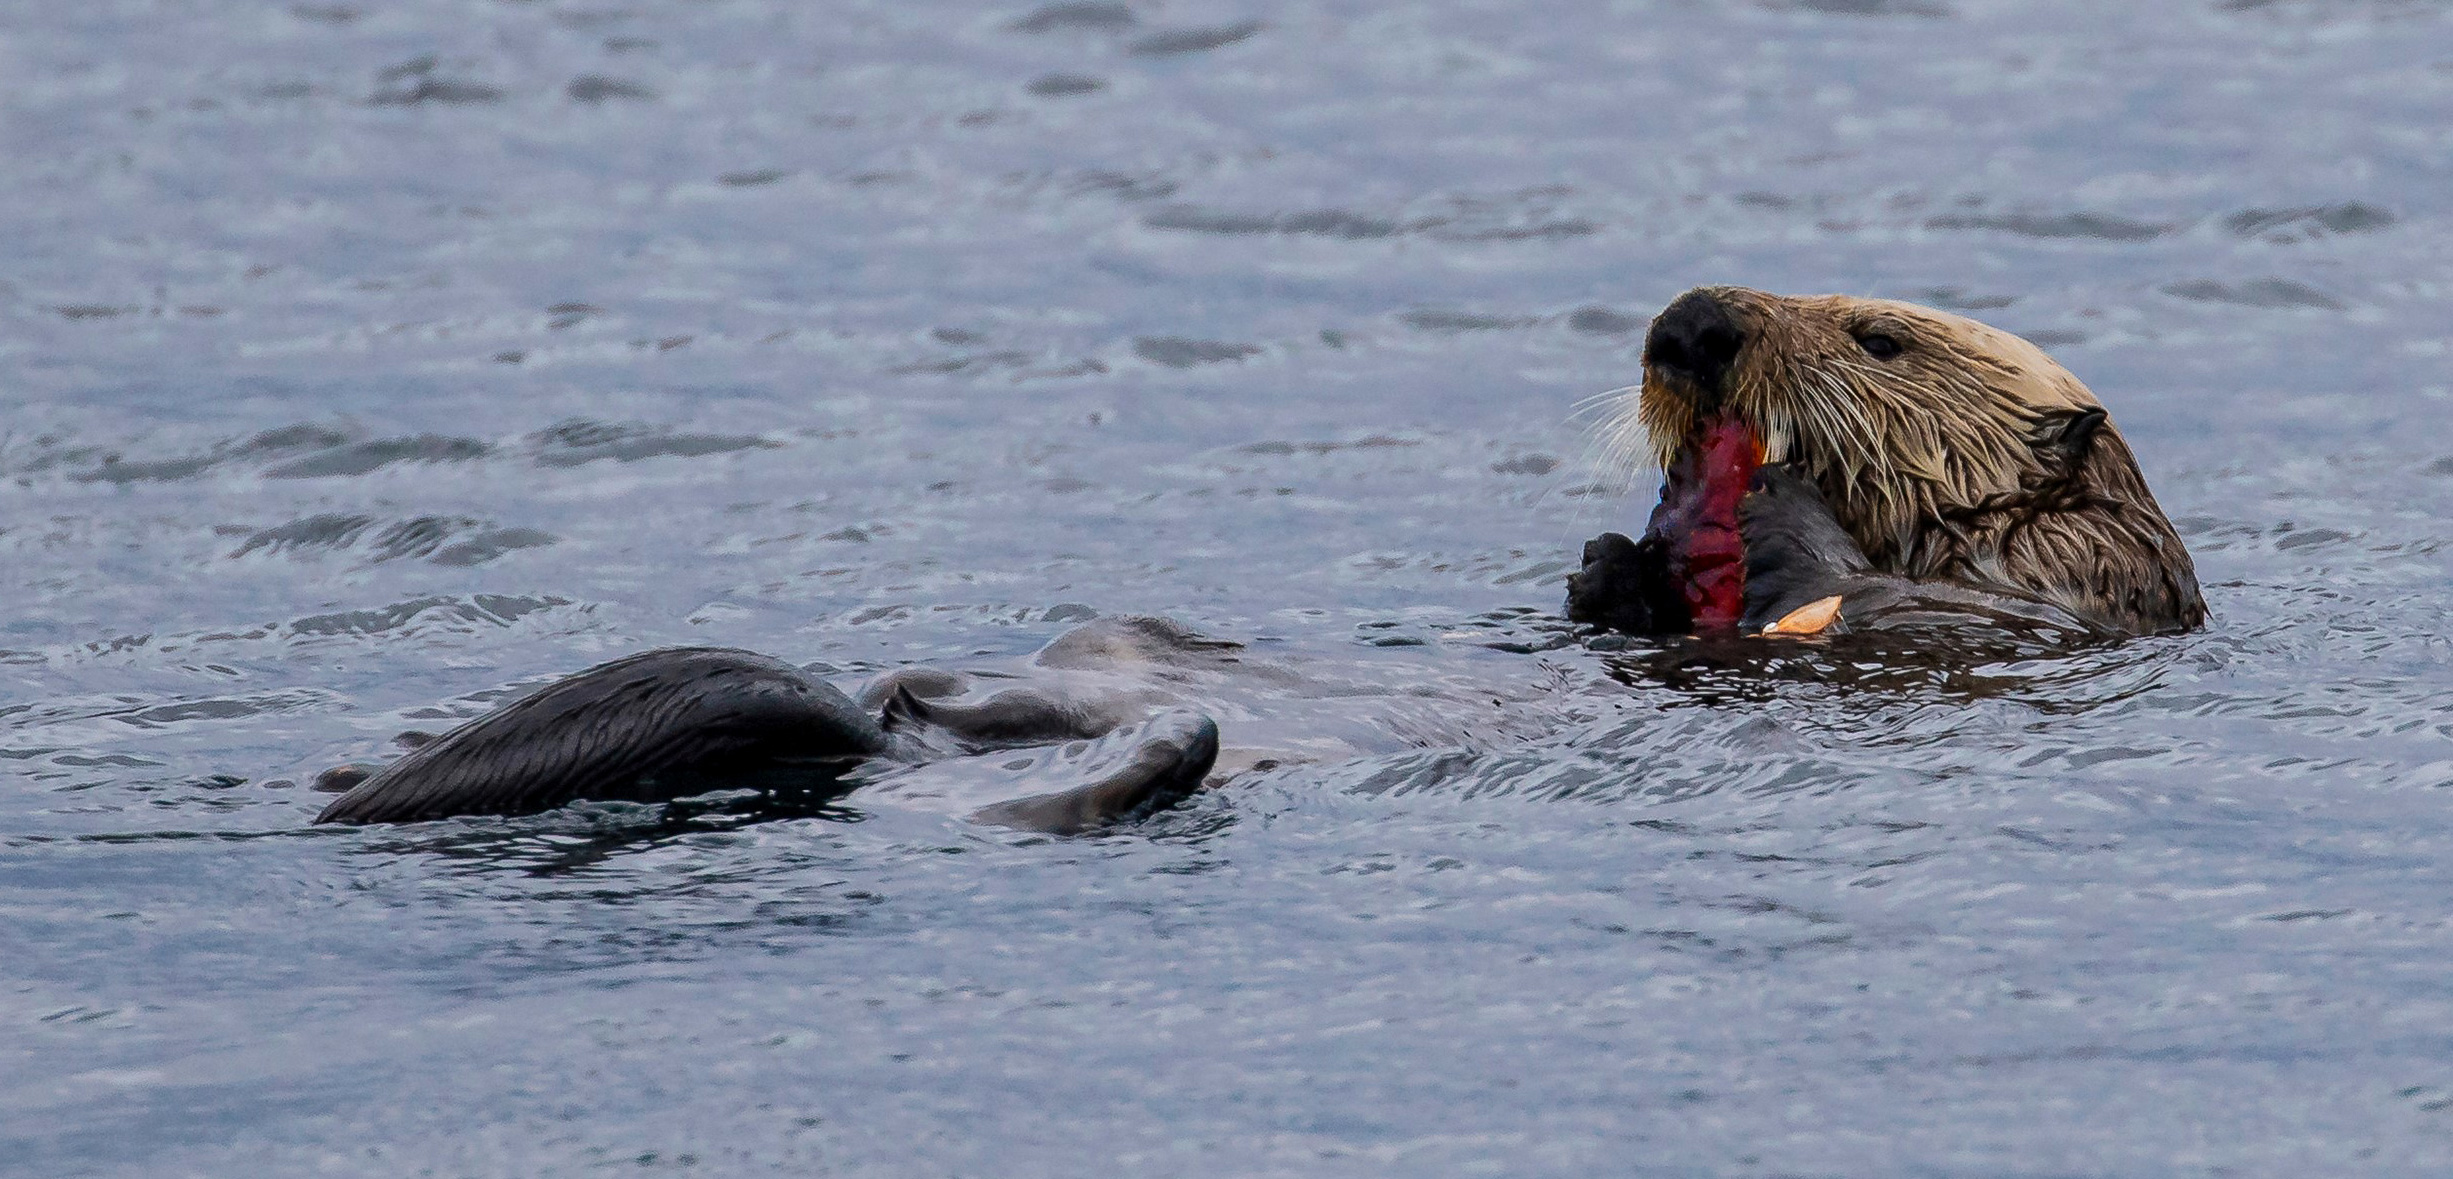 Sea otter floating in water eating a crab